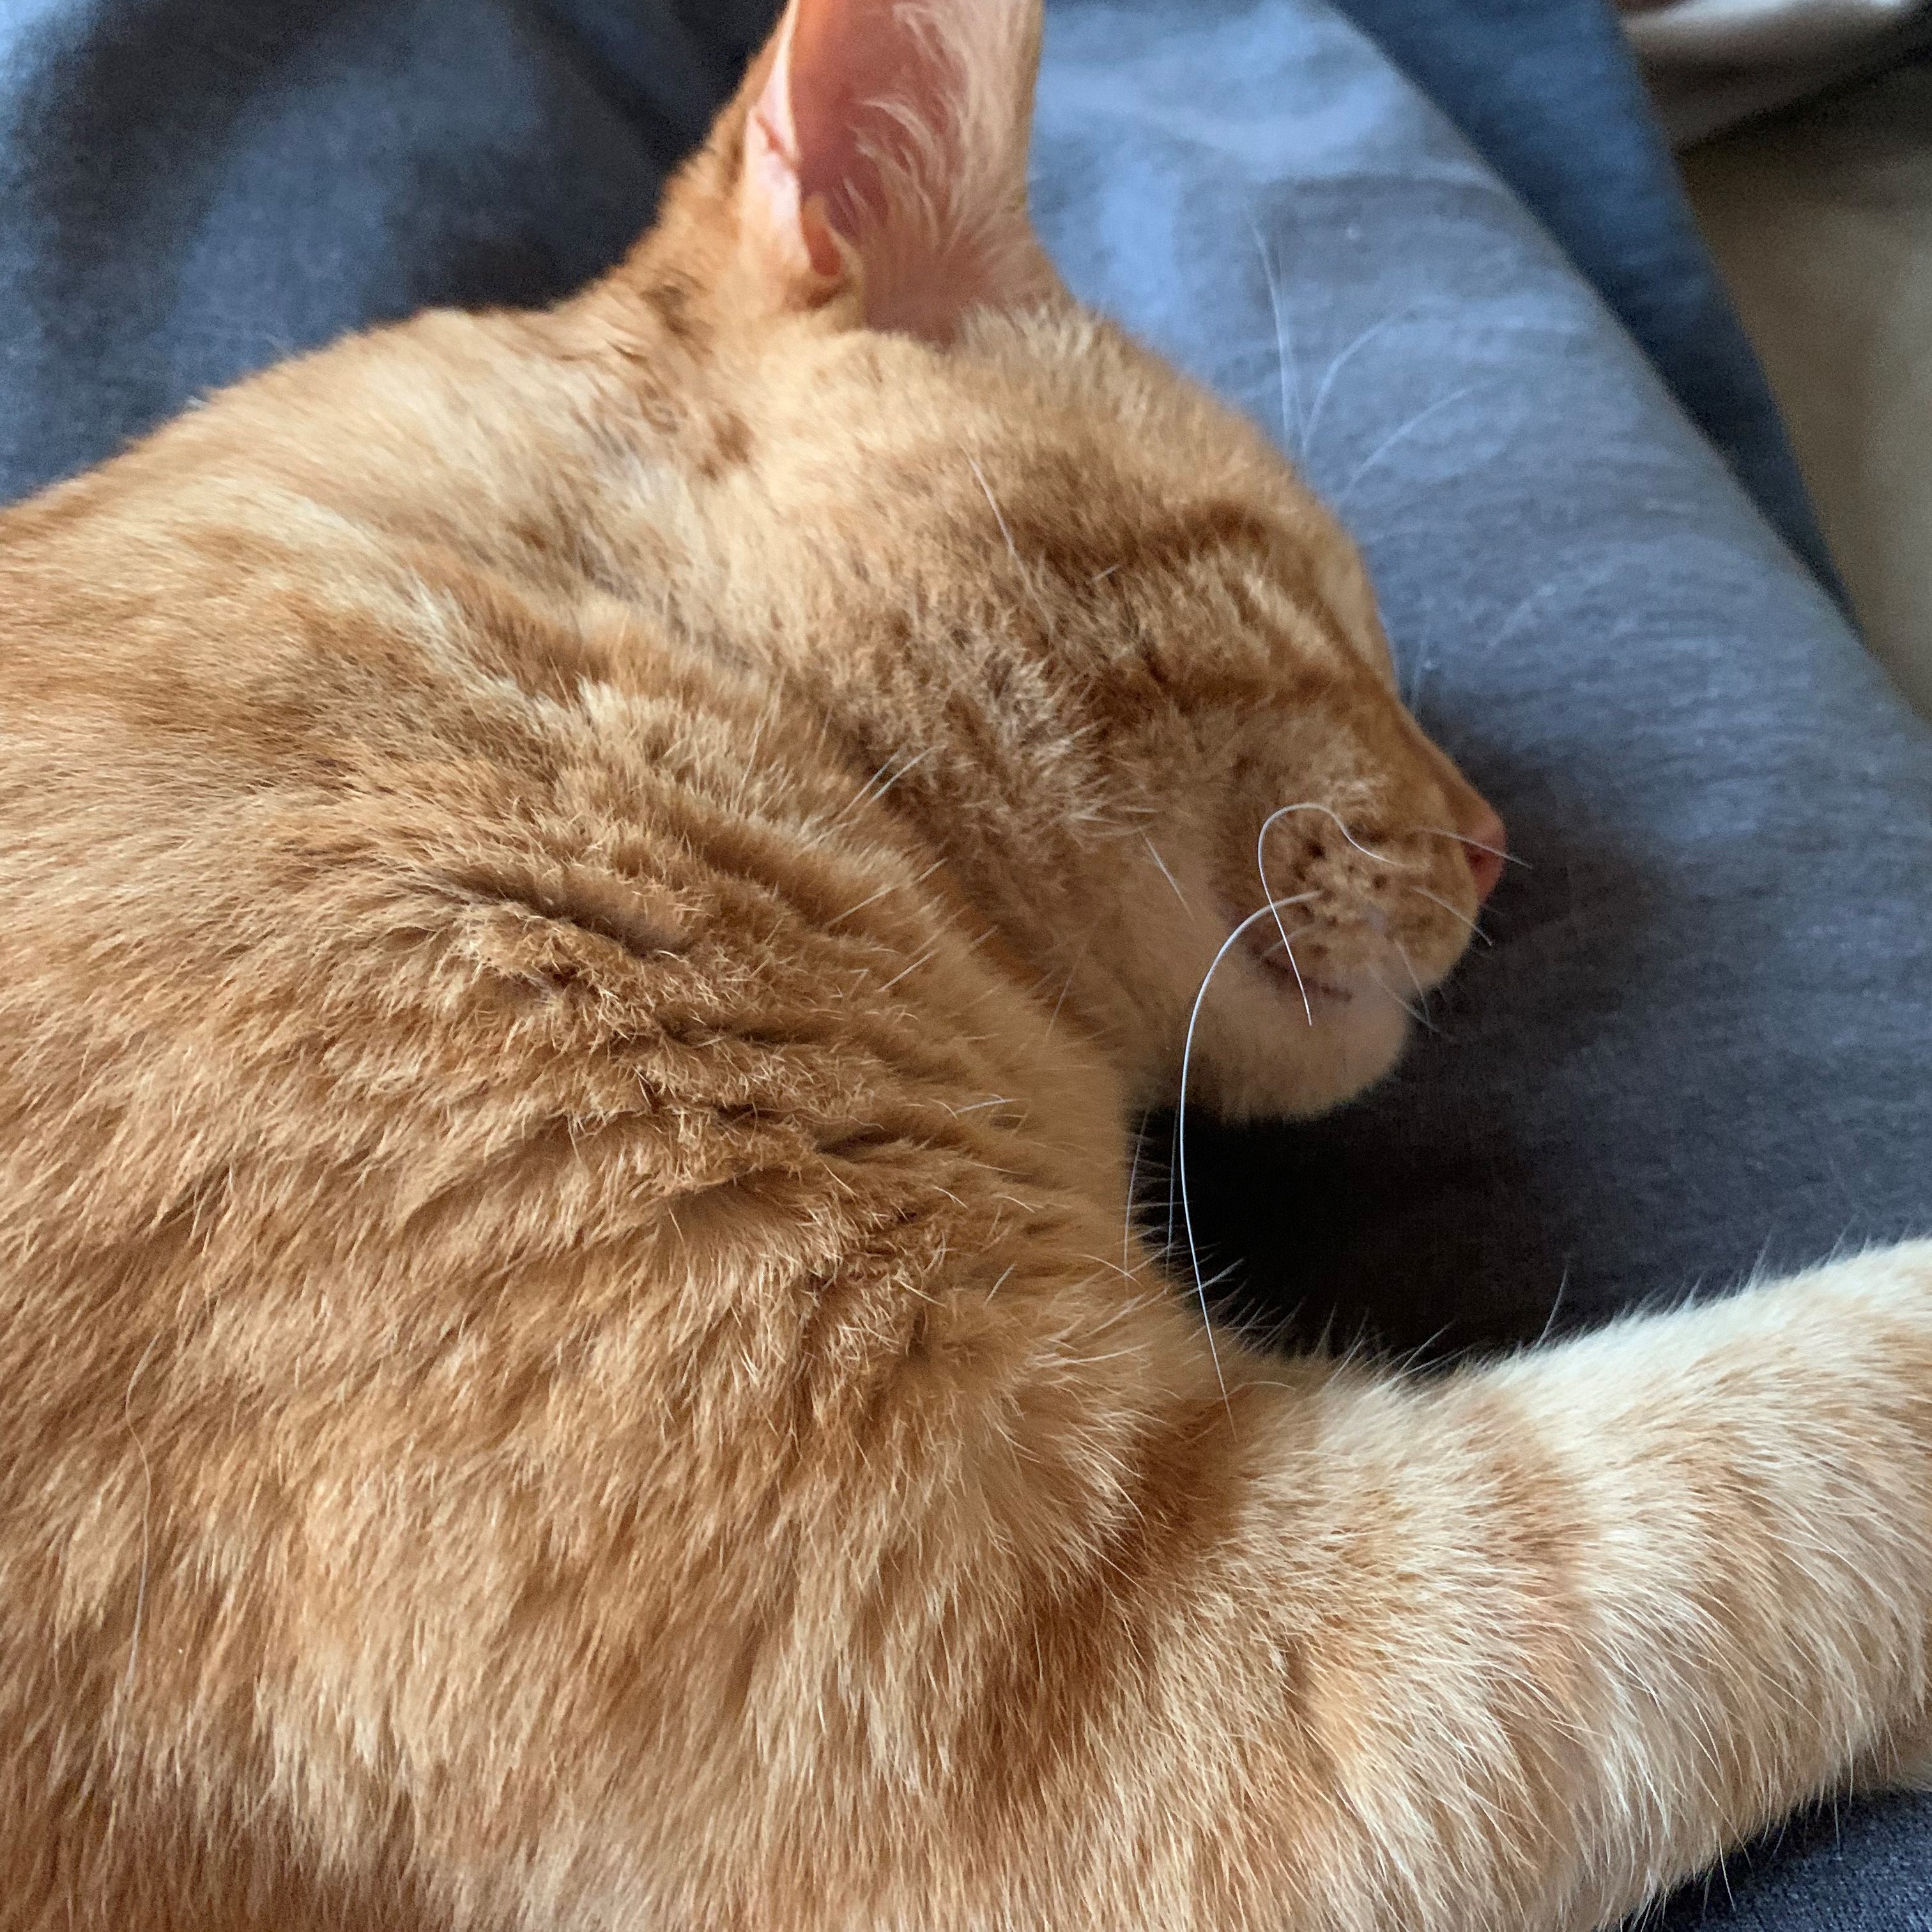 a close-up picture of stanley from above. he is asleep, laying on his side on a person's legs, stretching his arm over them like he is hugging them